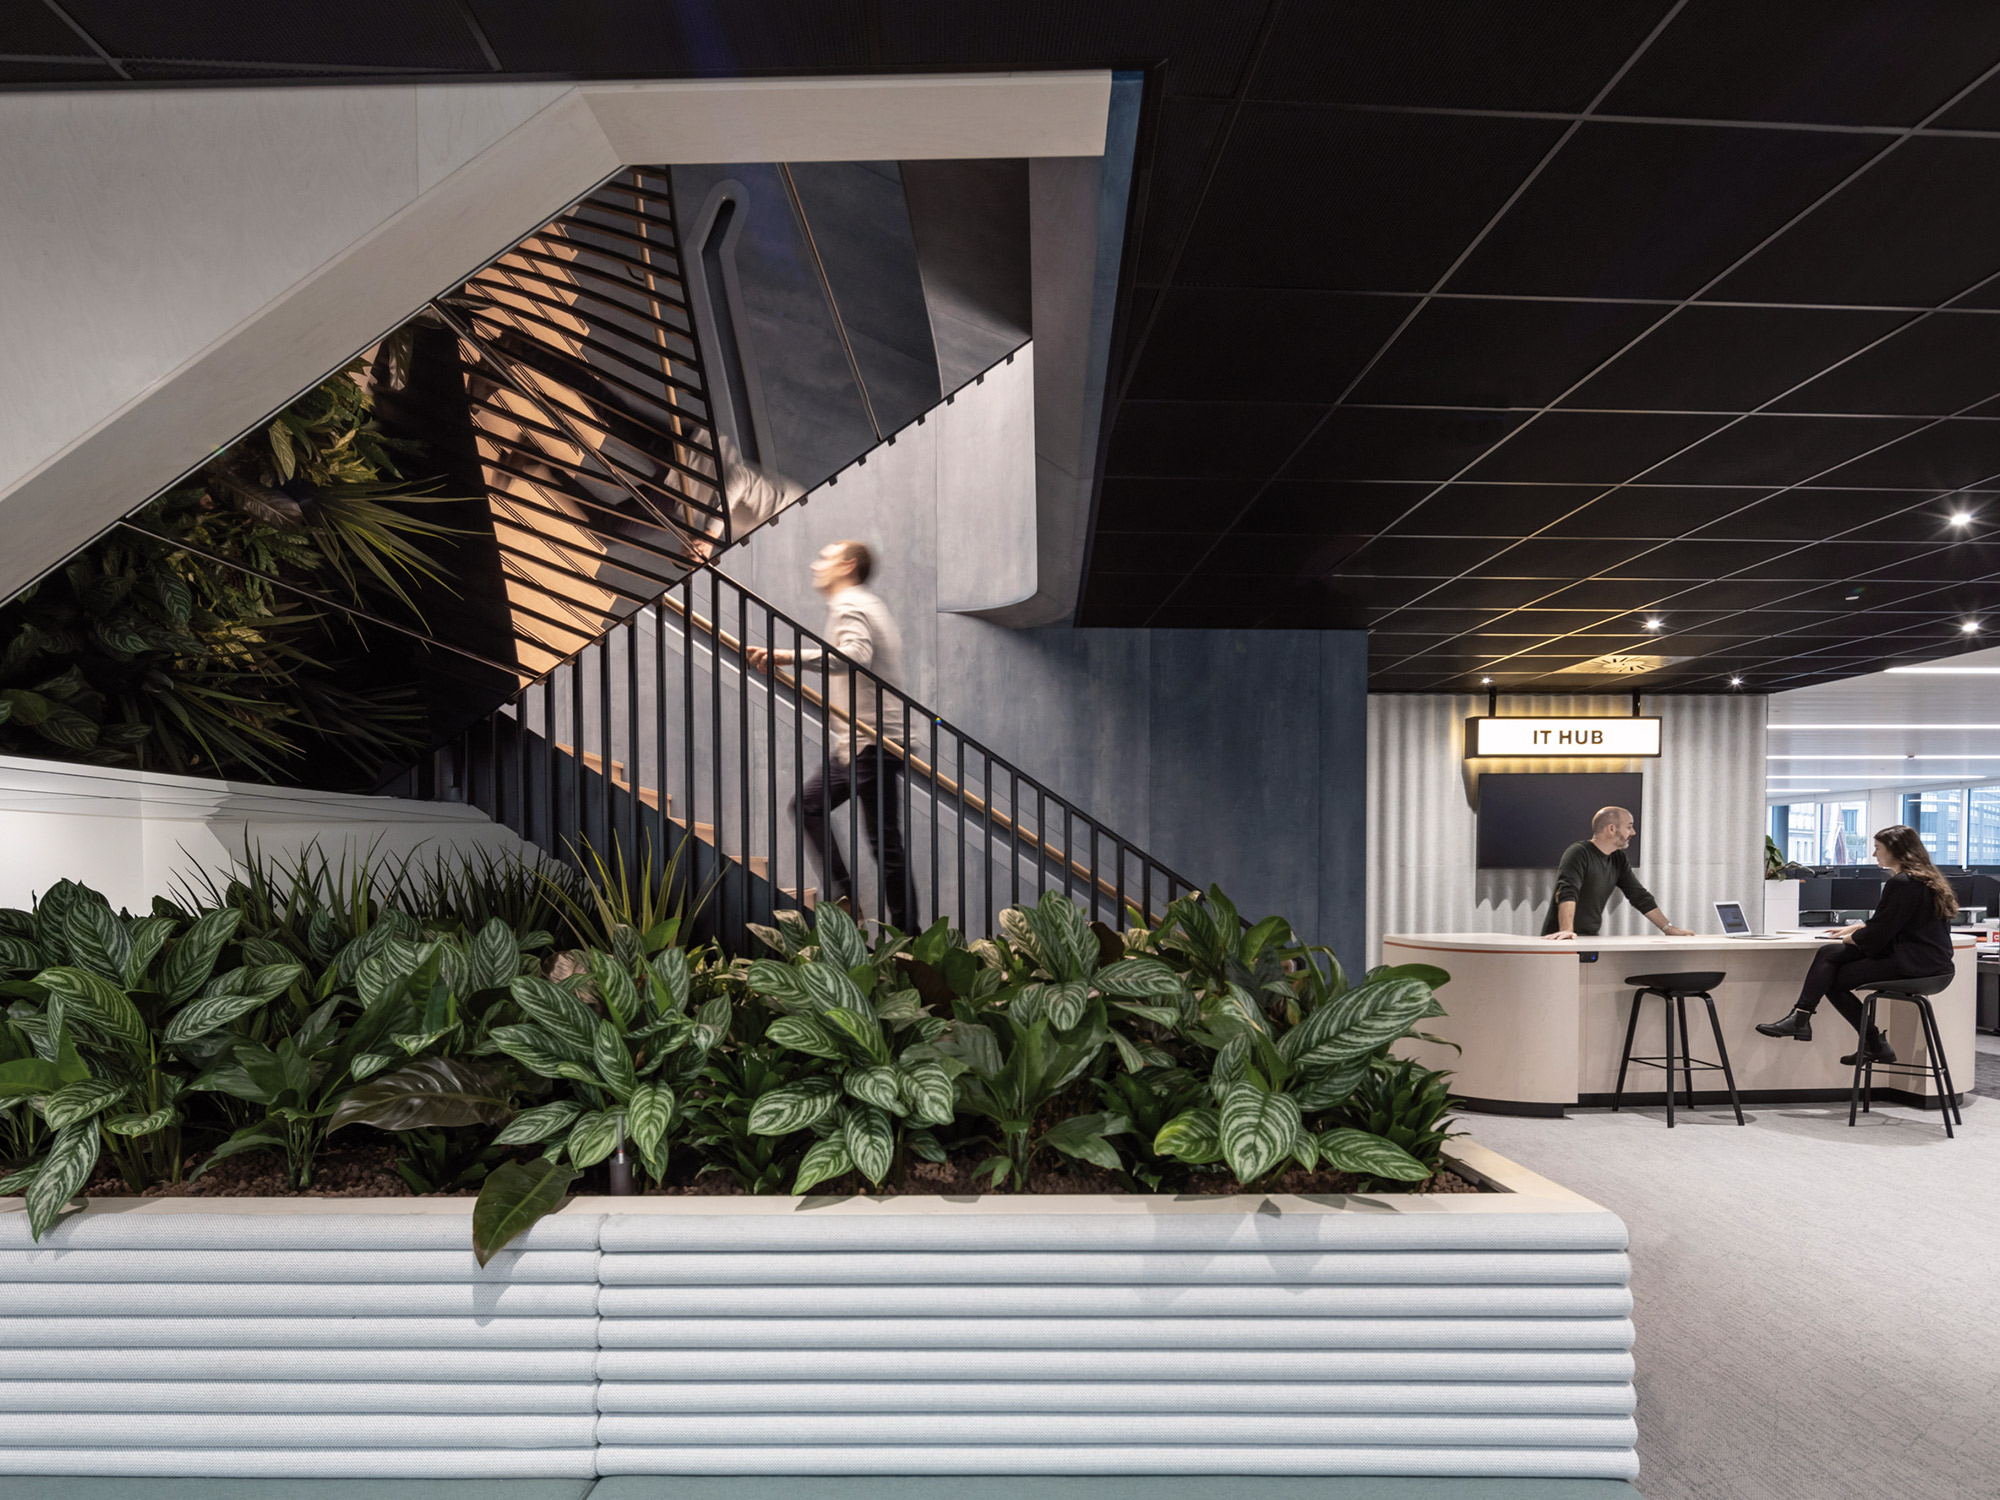 Modern office space featuring a sleek staircase with a person descending, lush green plants at the base, and an it hub counter with an attendant in the background.